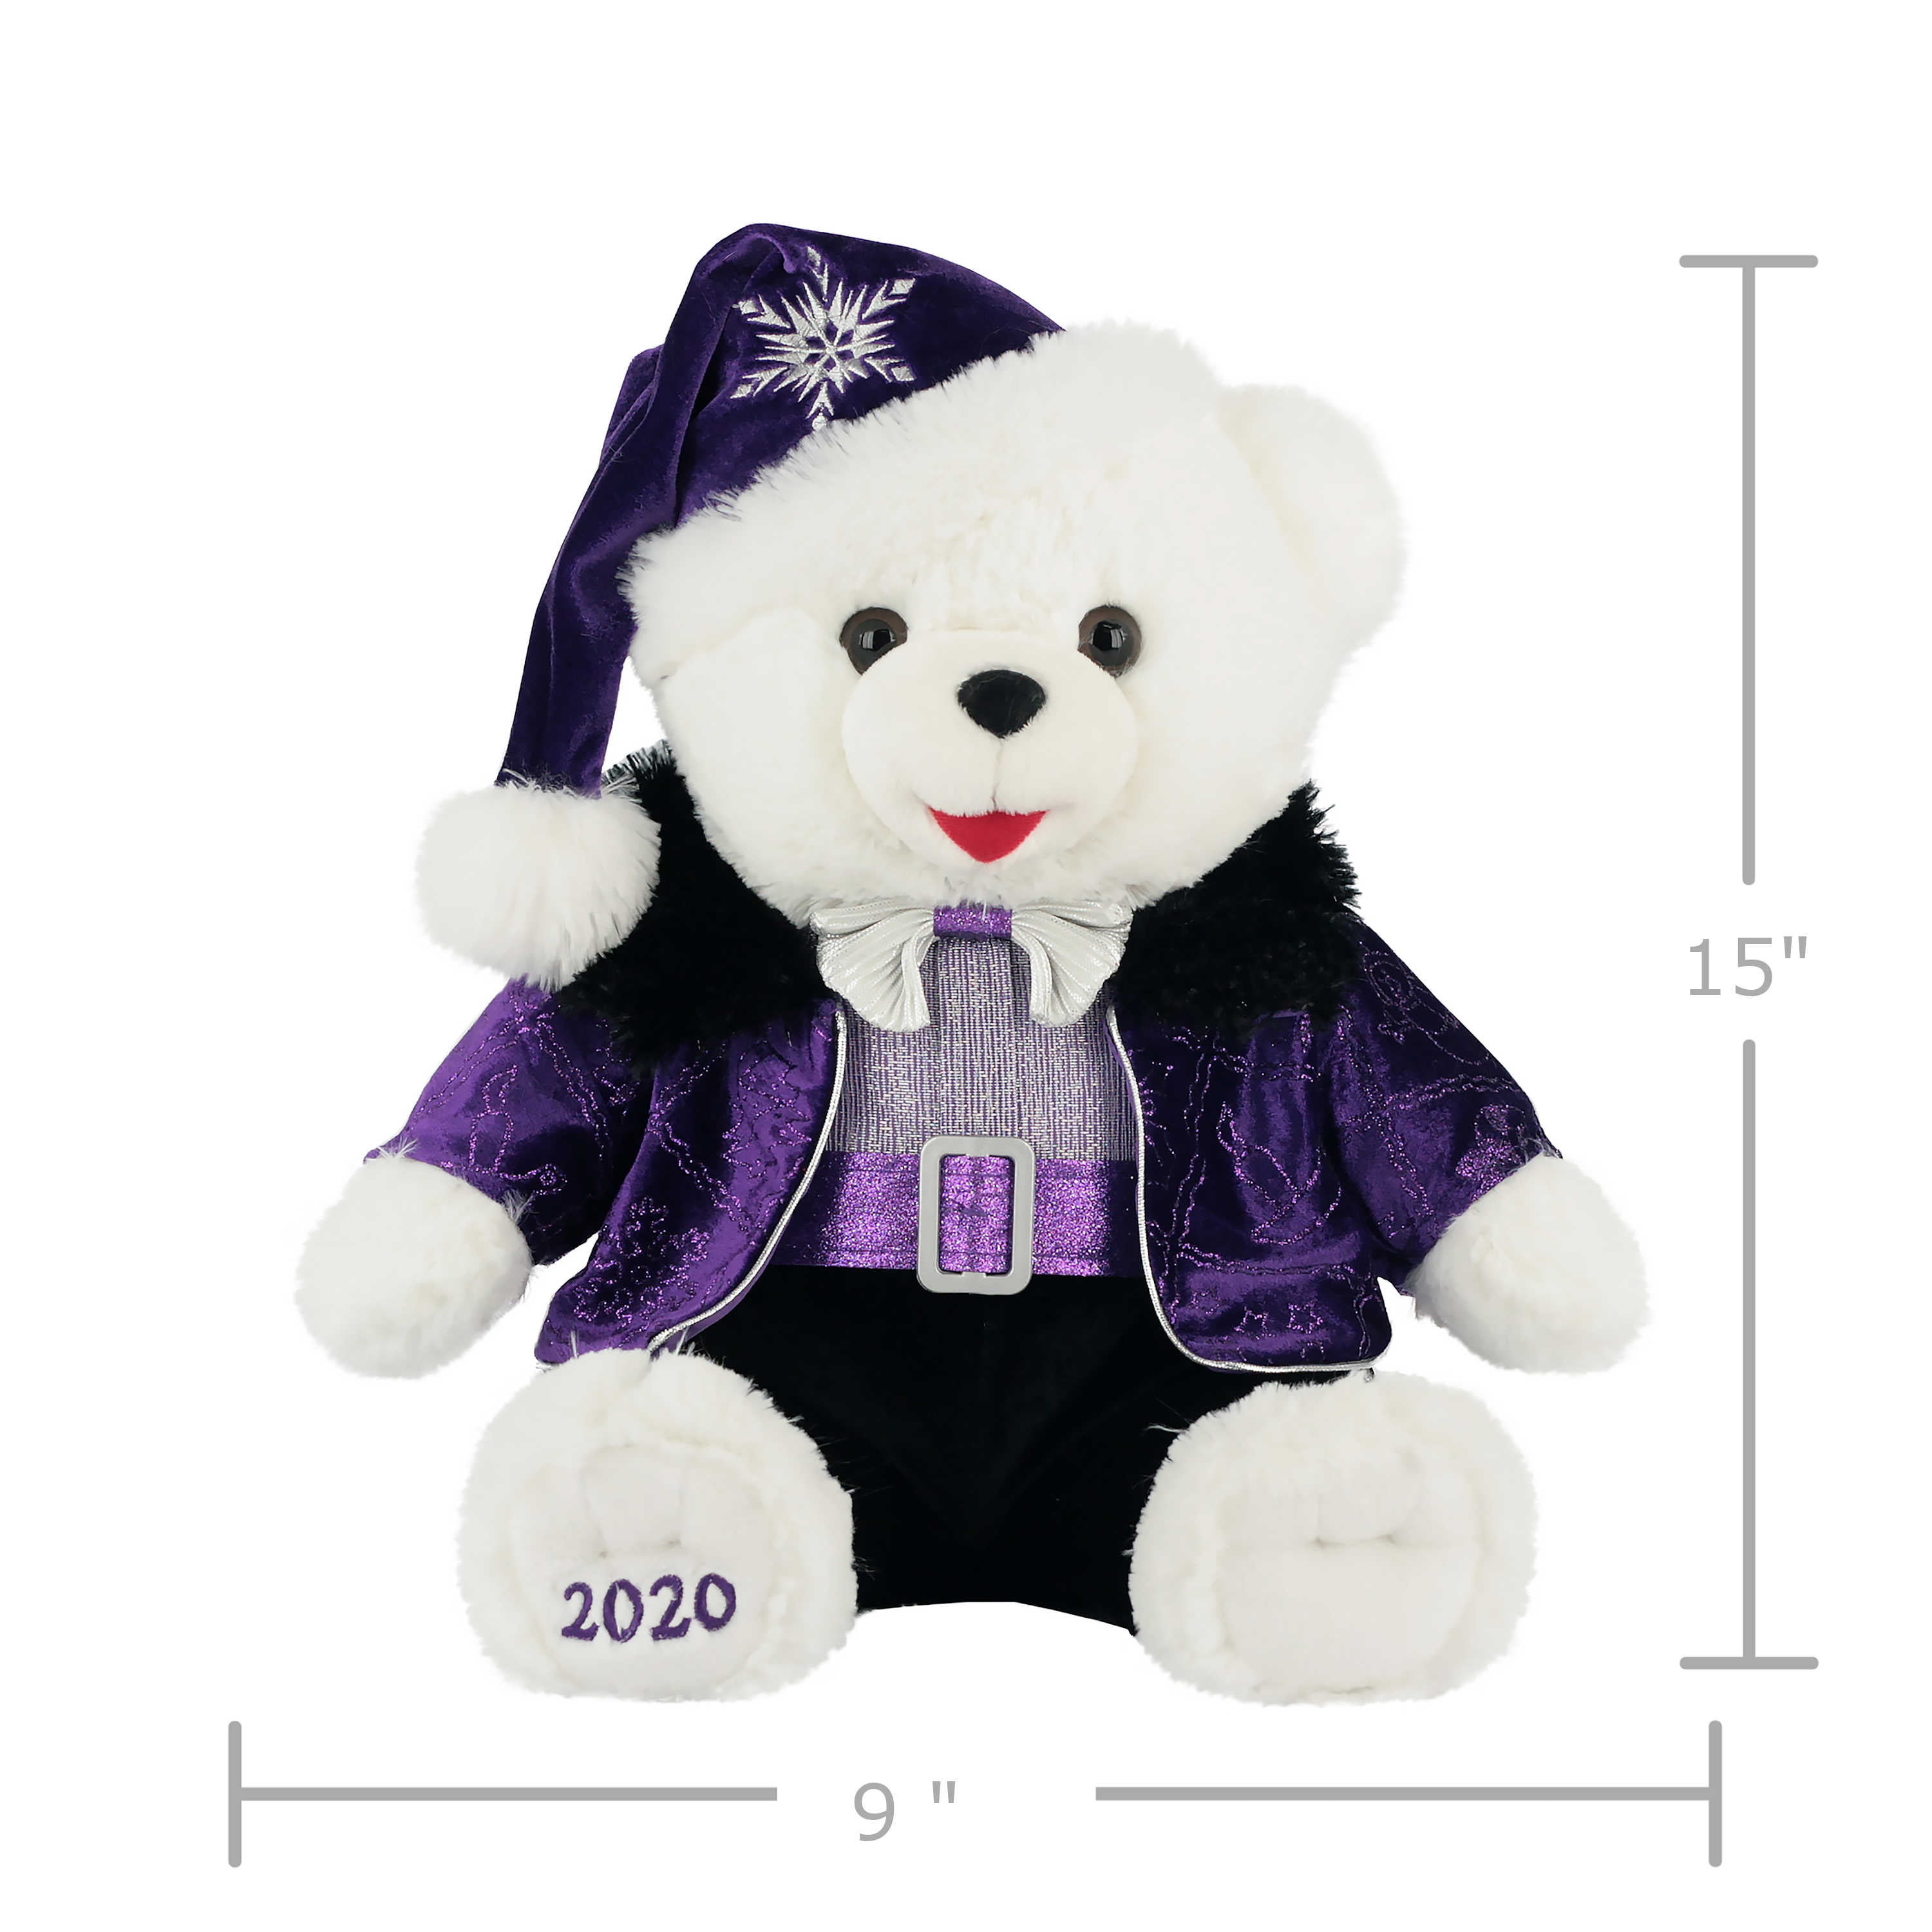 Details about   2020 Little Snowflake 12” Brown Teddy Bears Girl Plush Holiday Christmas AR188 